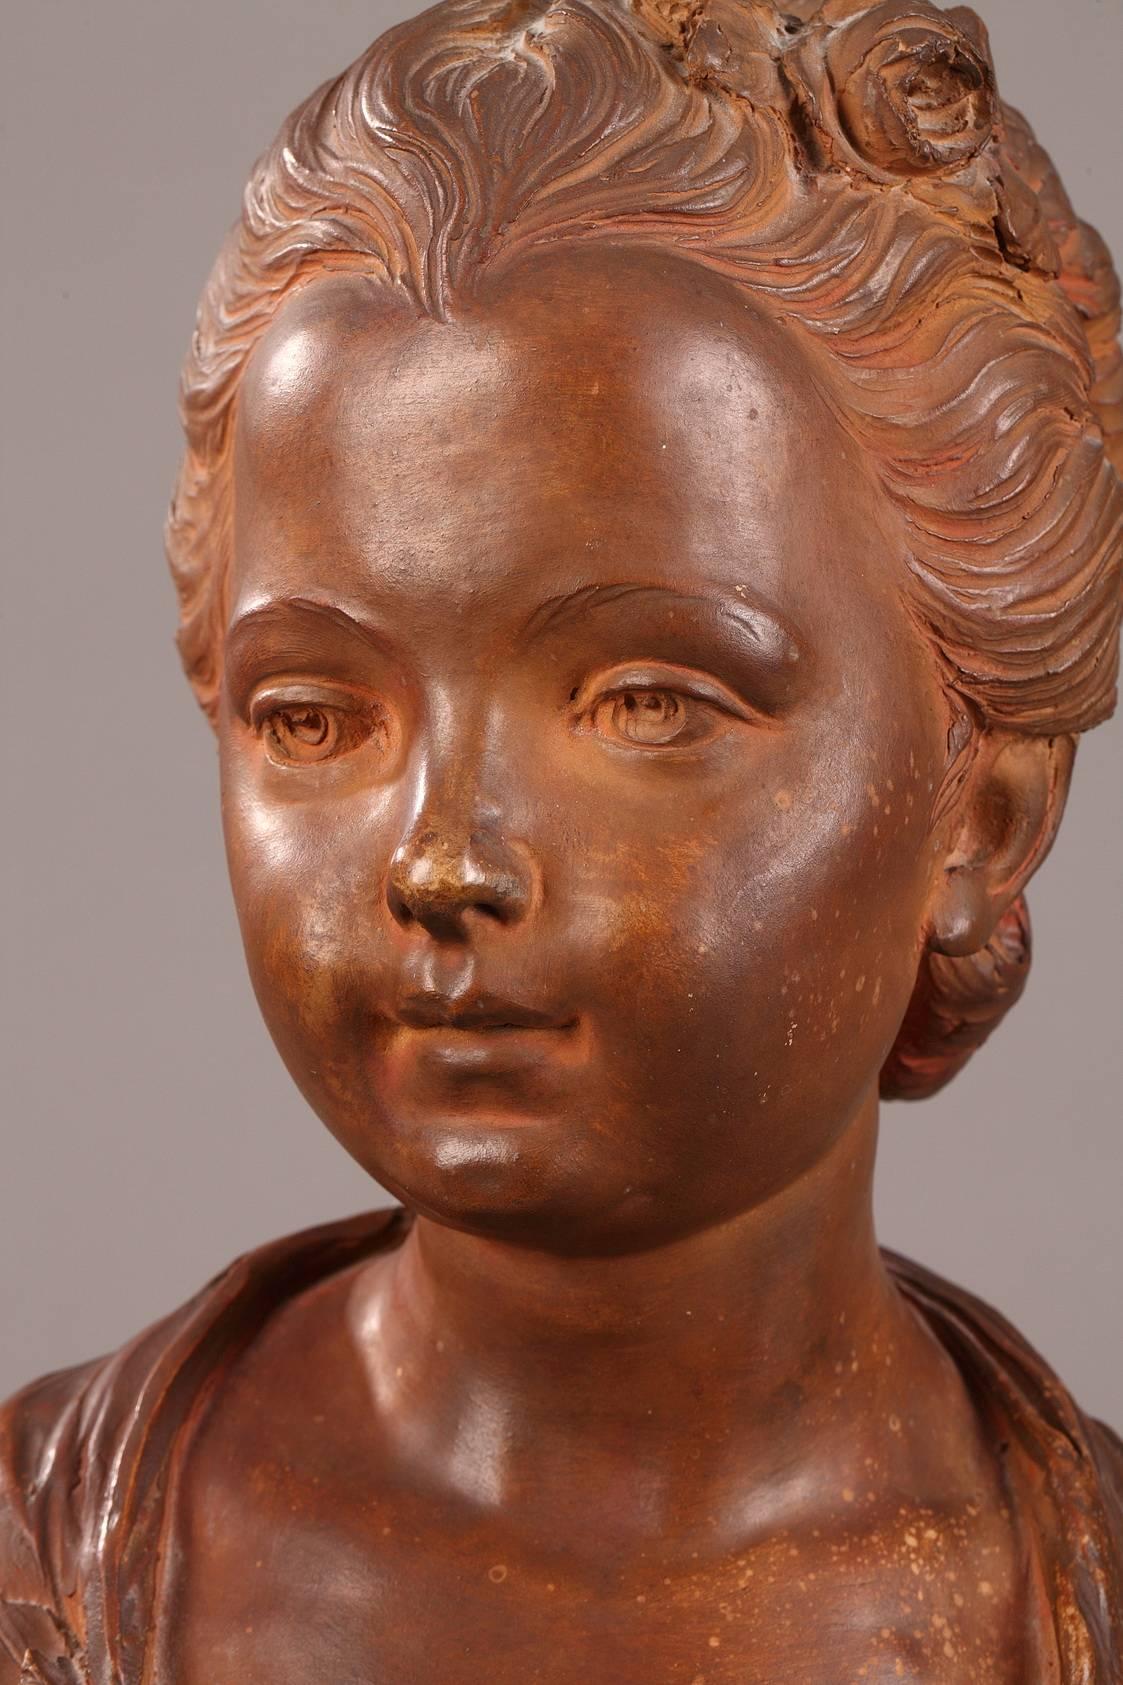 Terracotta bust of a young woman with a melancholy expression, dressed in 18th century clothing. Her hair, pulled back by a ribbon decorated with roses, frames a round and expressive face. The bust rests on a terraced, circular base. Signed on the